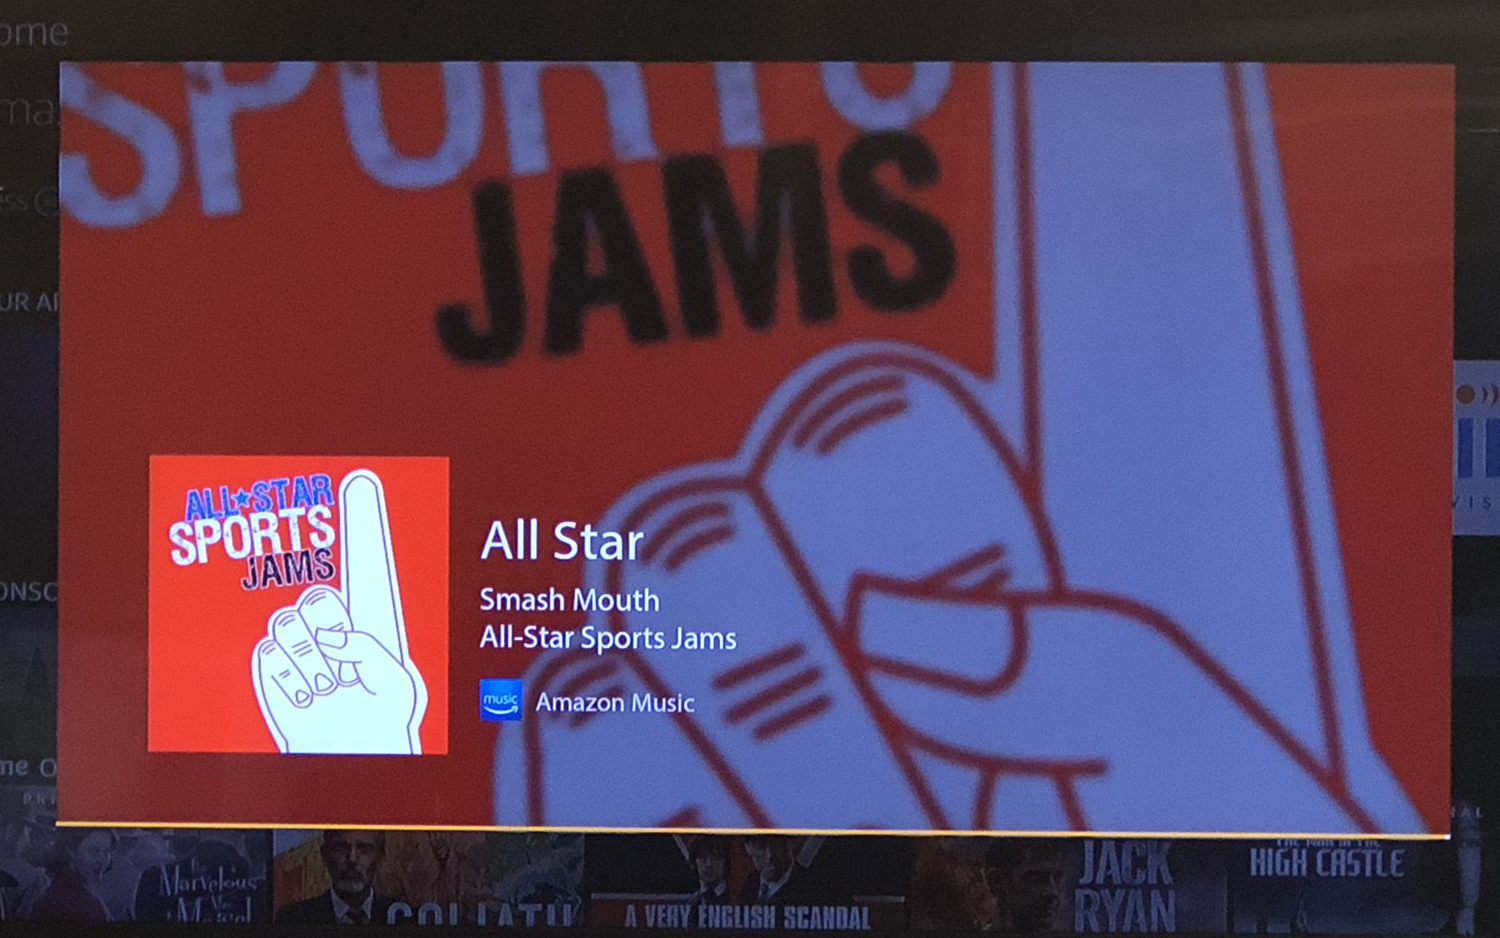 The Fire TV Stick interface playing Smash Mouth's All Star